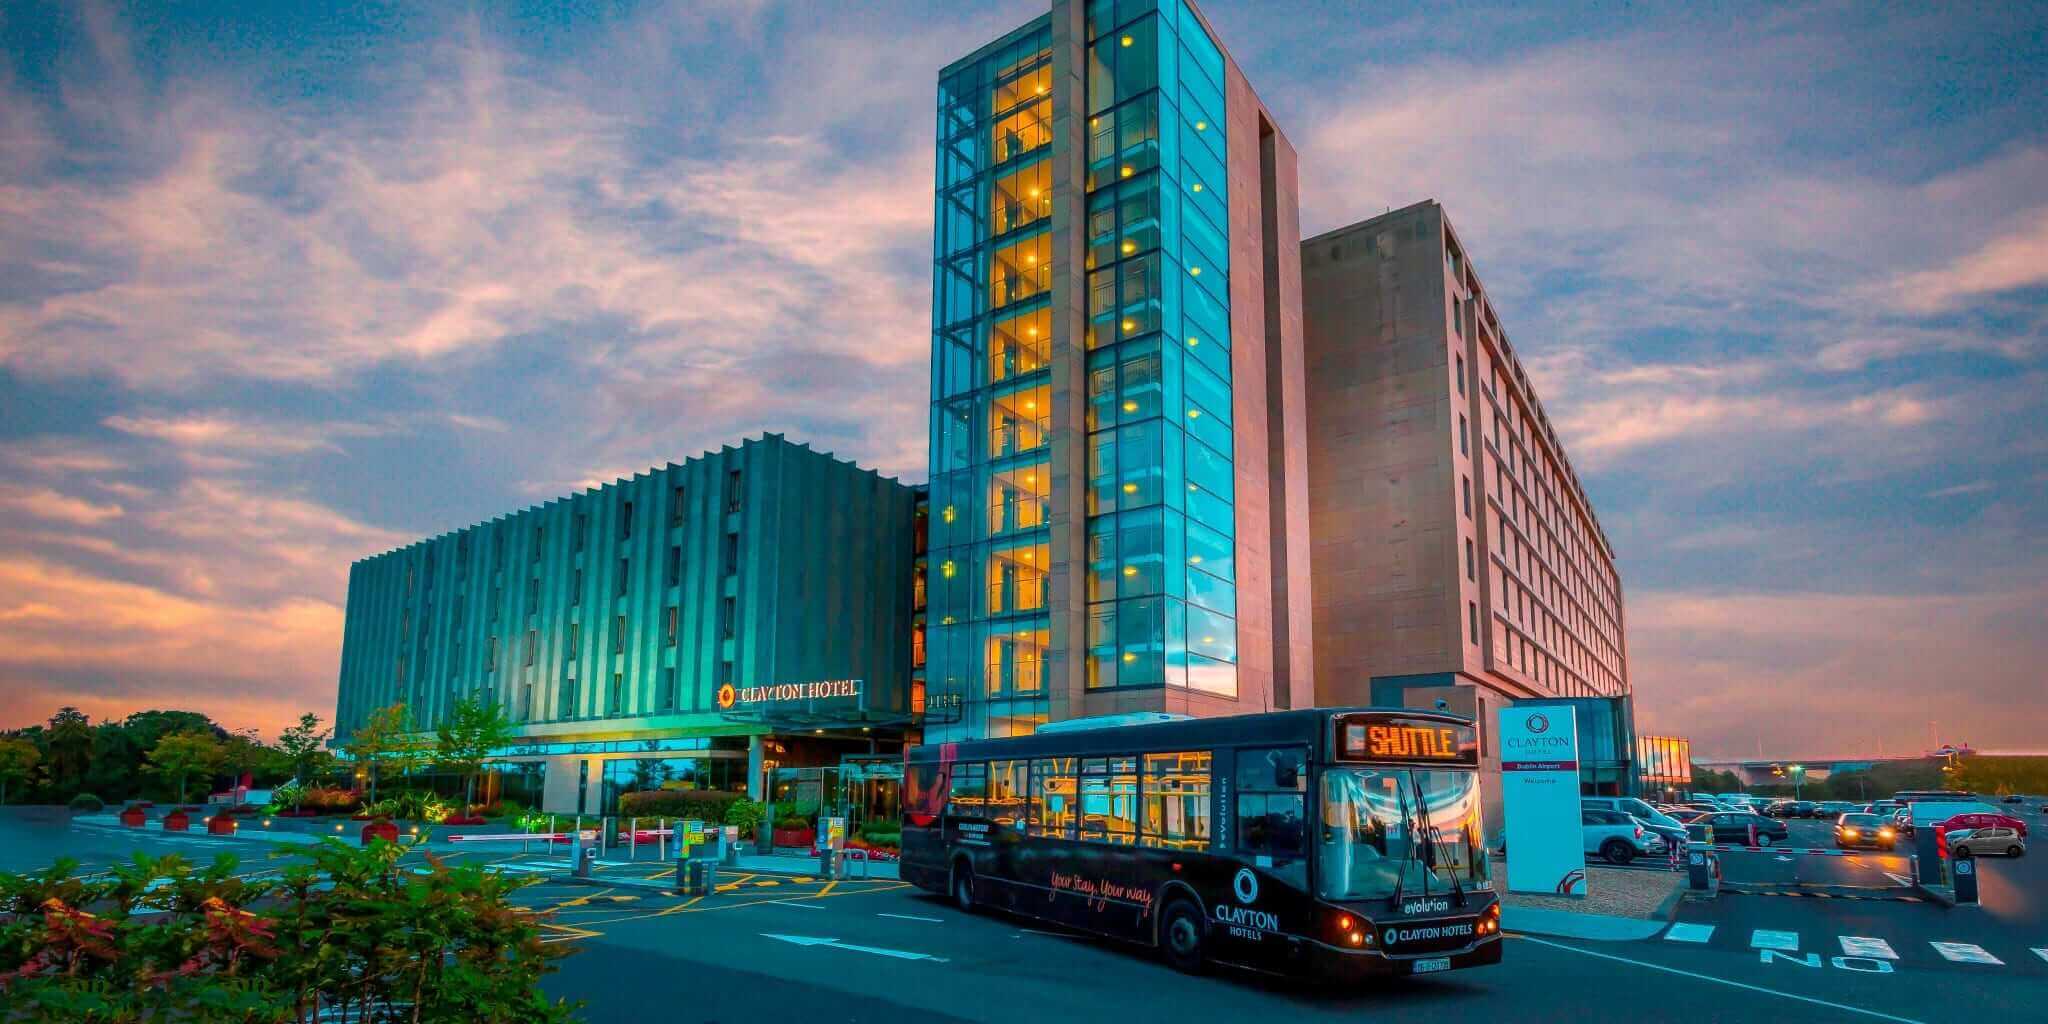 The outside of the Clayton Hotel with views of a beautiful sunset, along with the airport shuttle the hotel has to offer